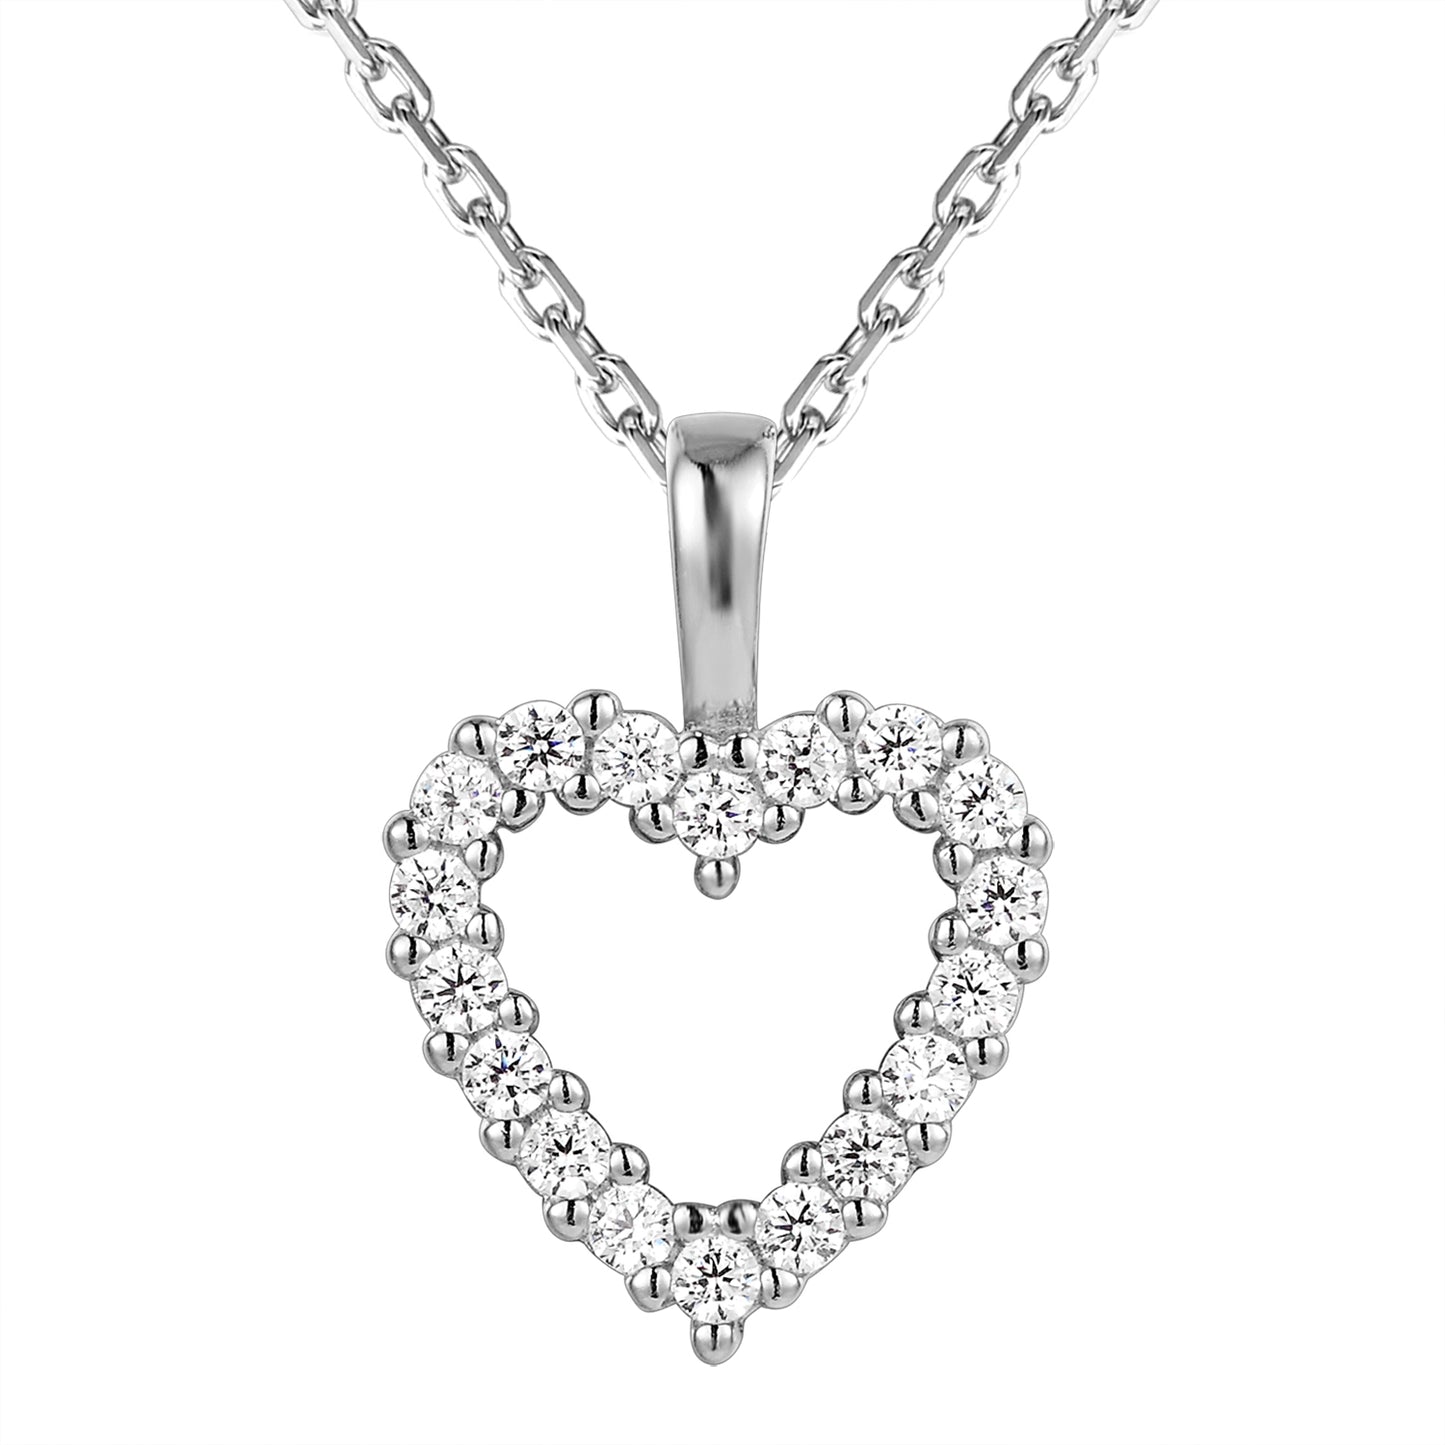 Solitaire Open Heart Frame Sterling Silver Pendant Chain Set